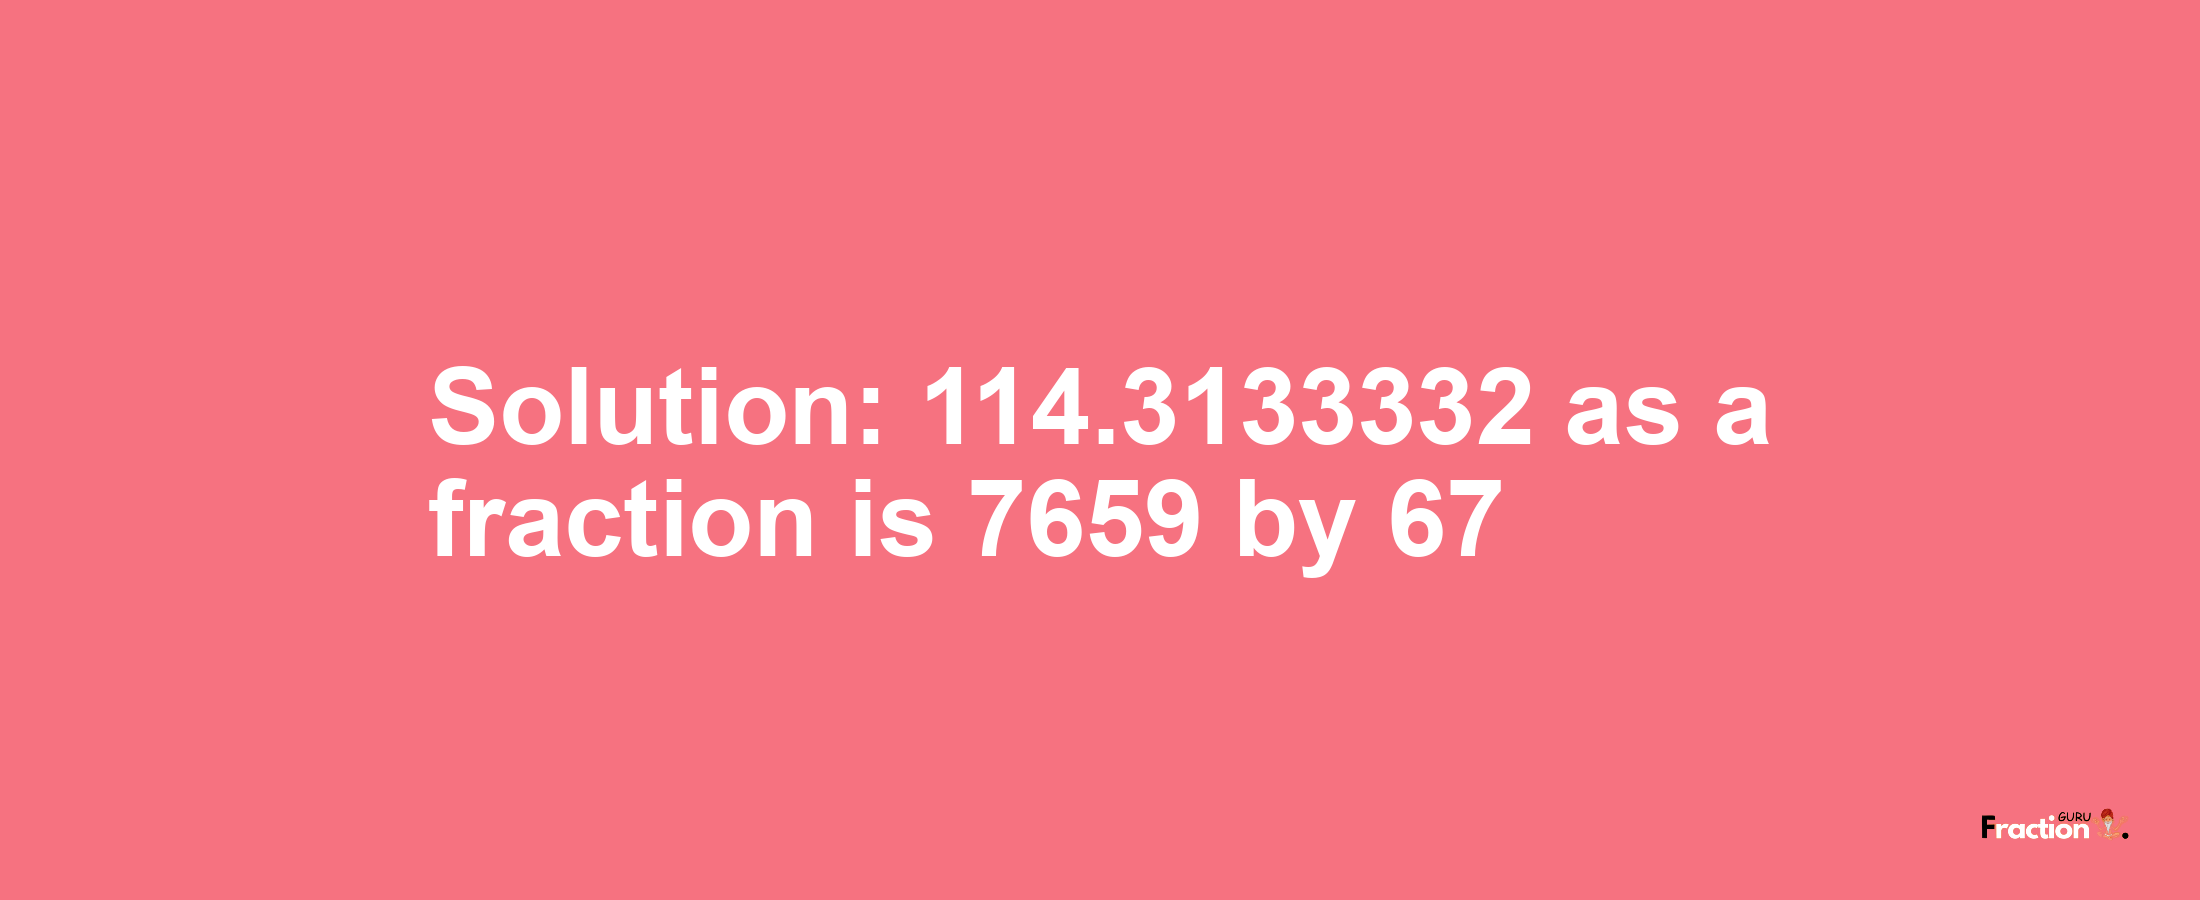 Solution:114.3133332 as a fraction is 7659/67